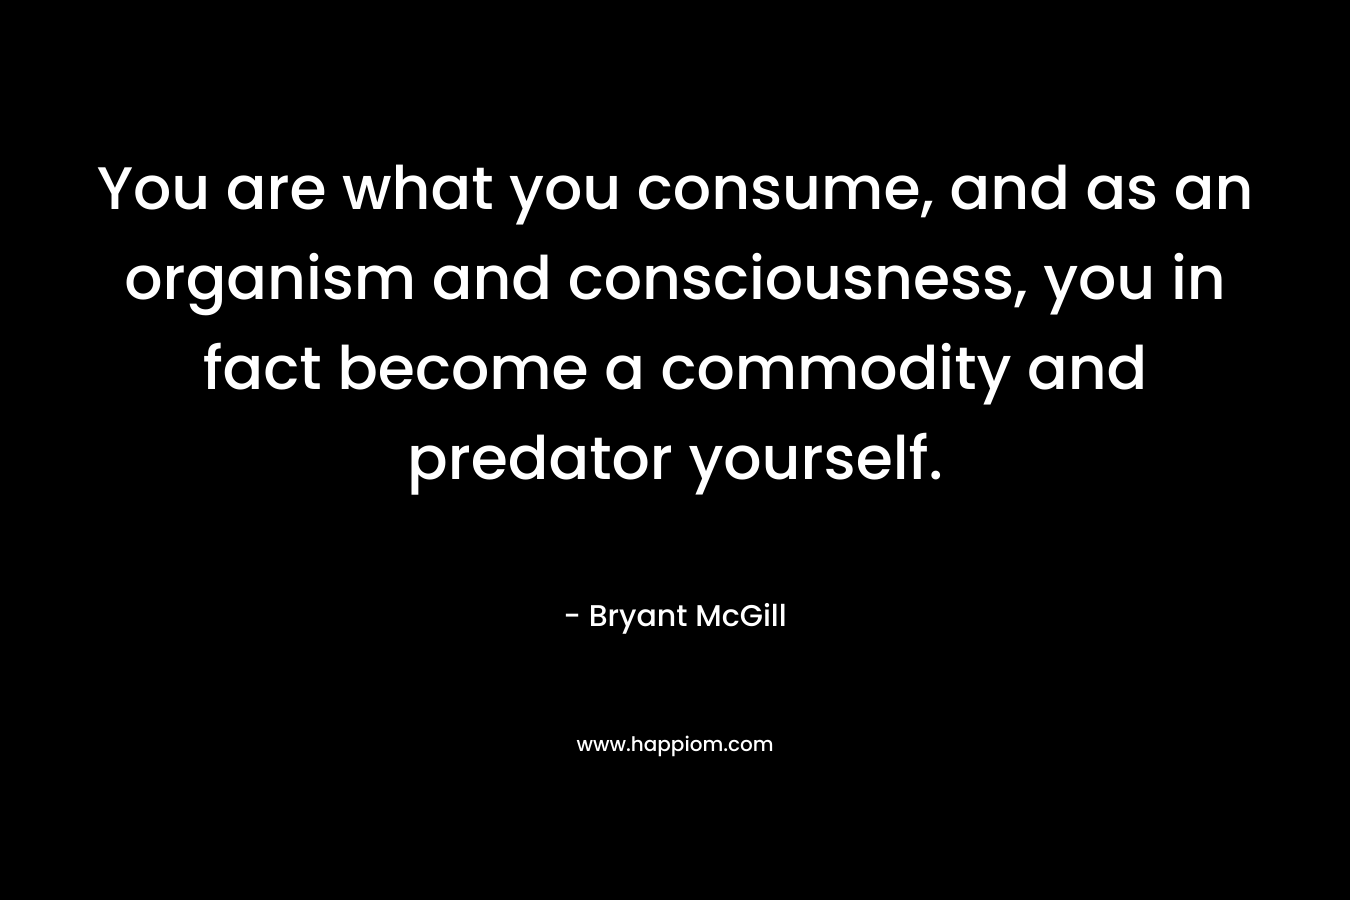 You are what you consume, and as an organism and consciousness, you in fact become a commodity and predator yourself. – Bryant McGill